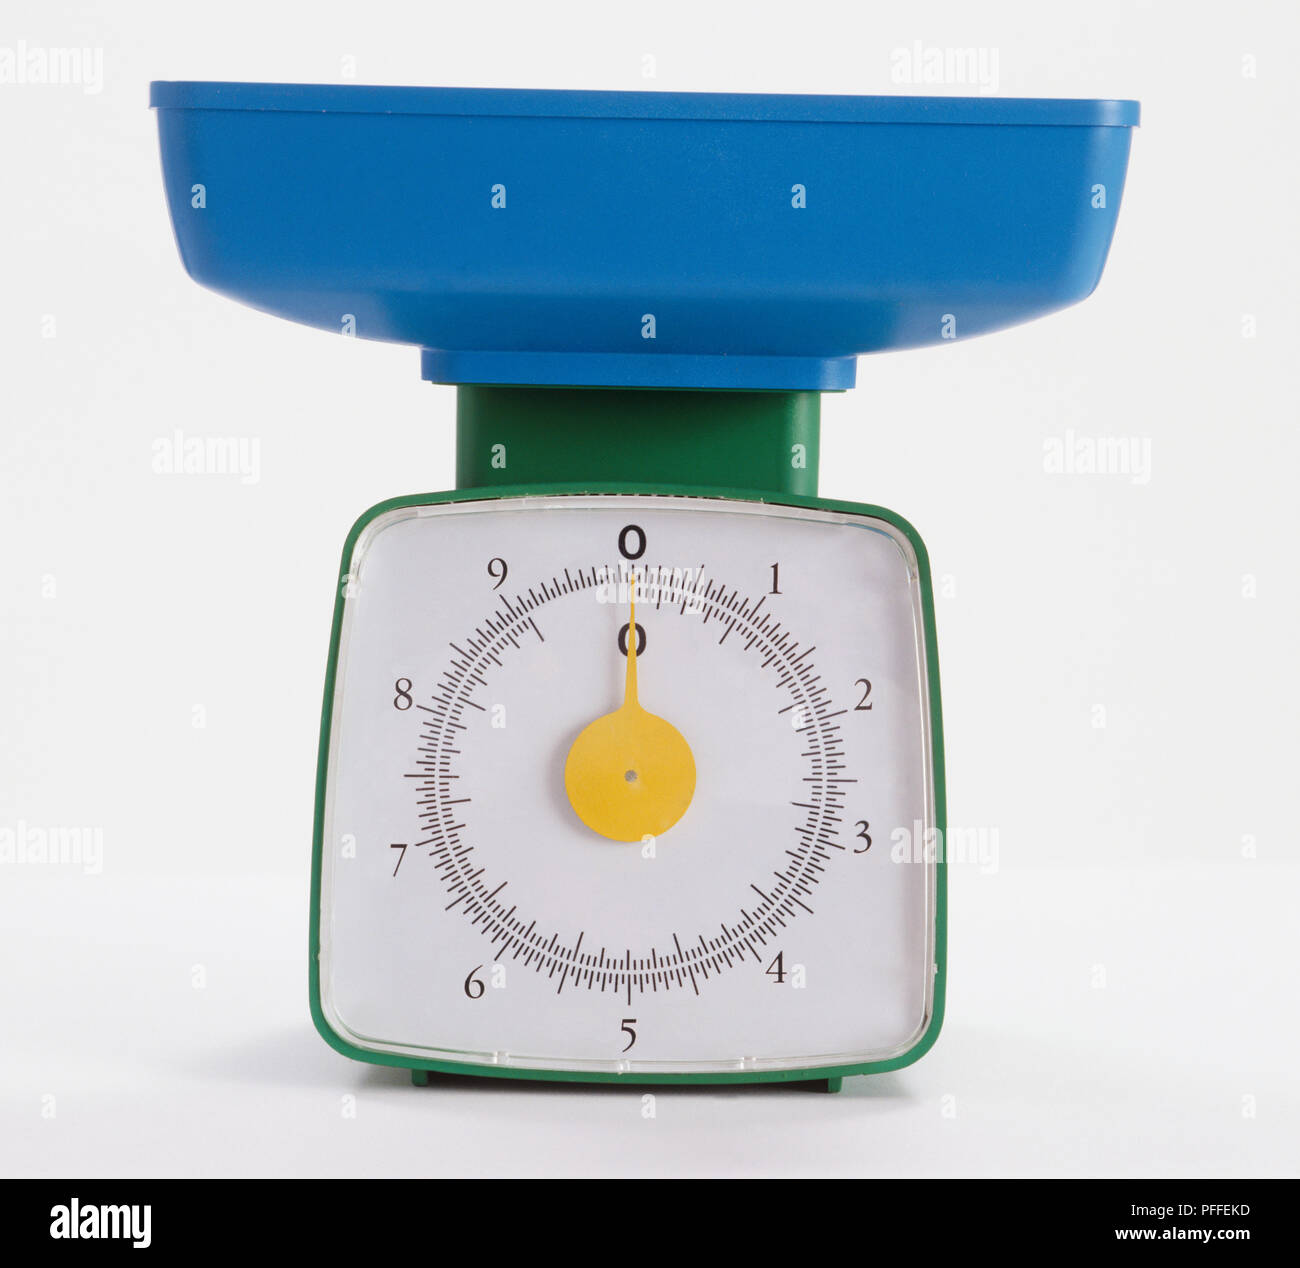 https://c8.alamy.com/comp/PFFEKD/mechanical-weighing-scales-with-blue-plastic-bowl-to-hold-objects-PFFEKD.jpg